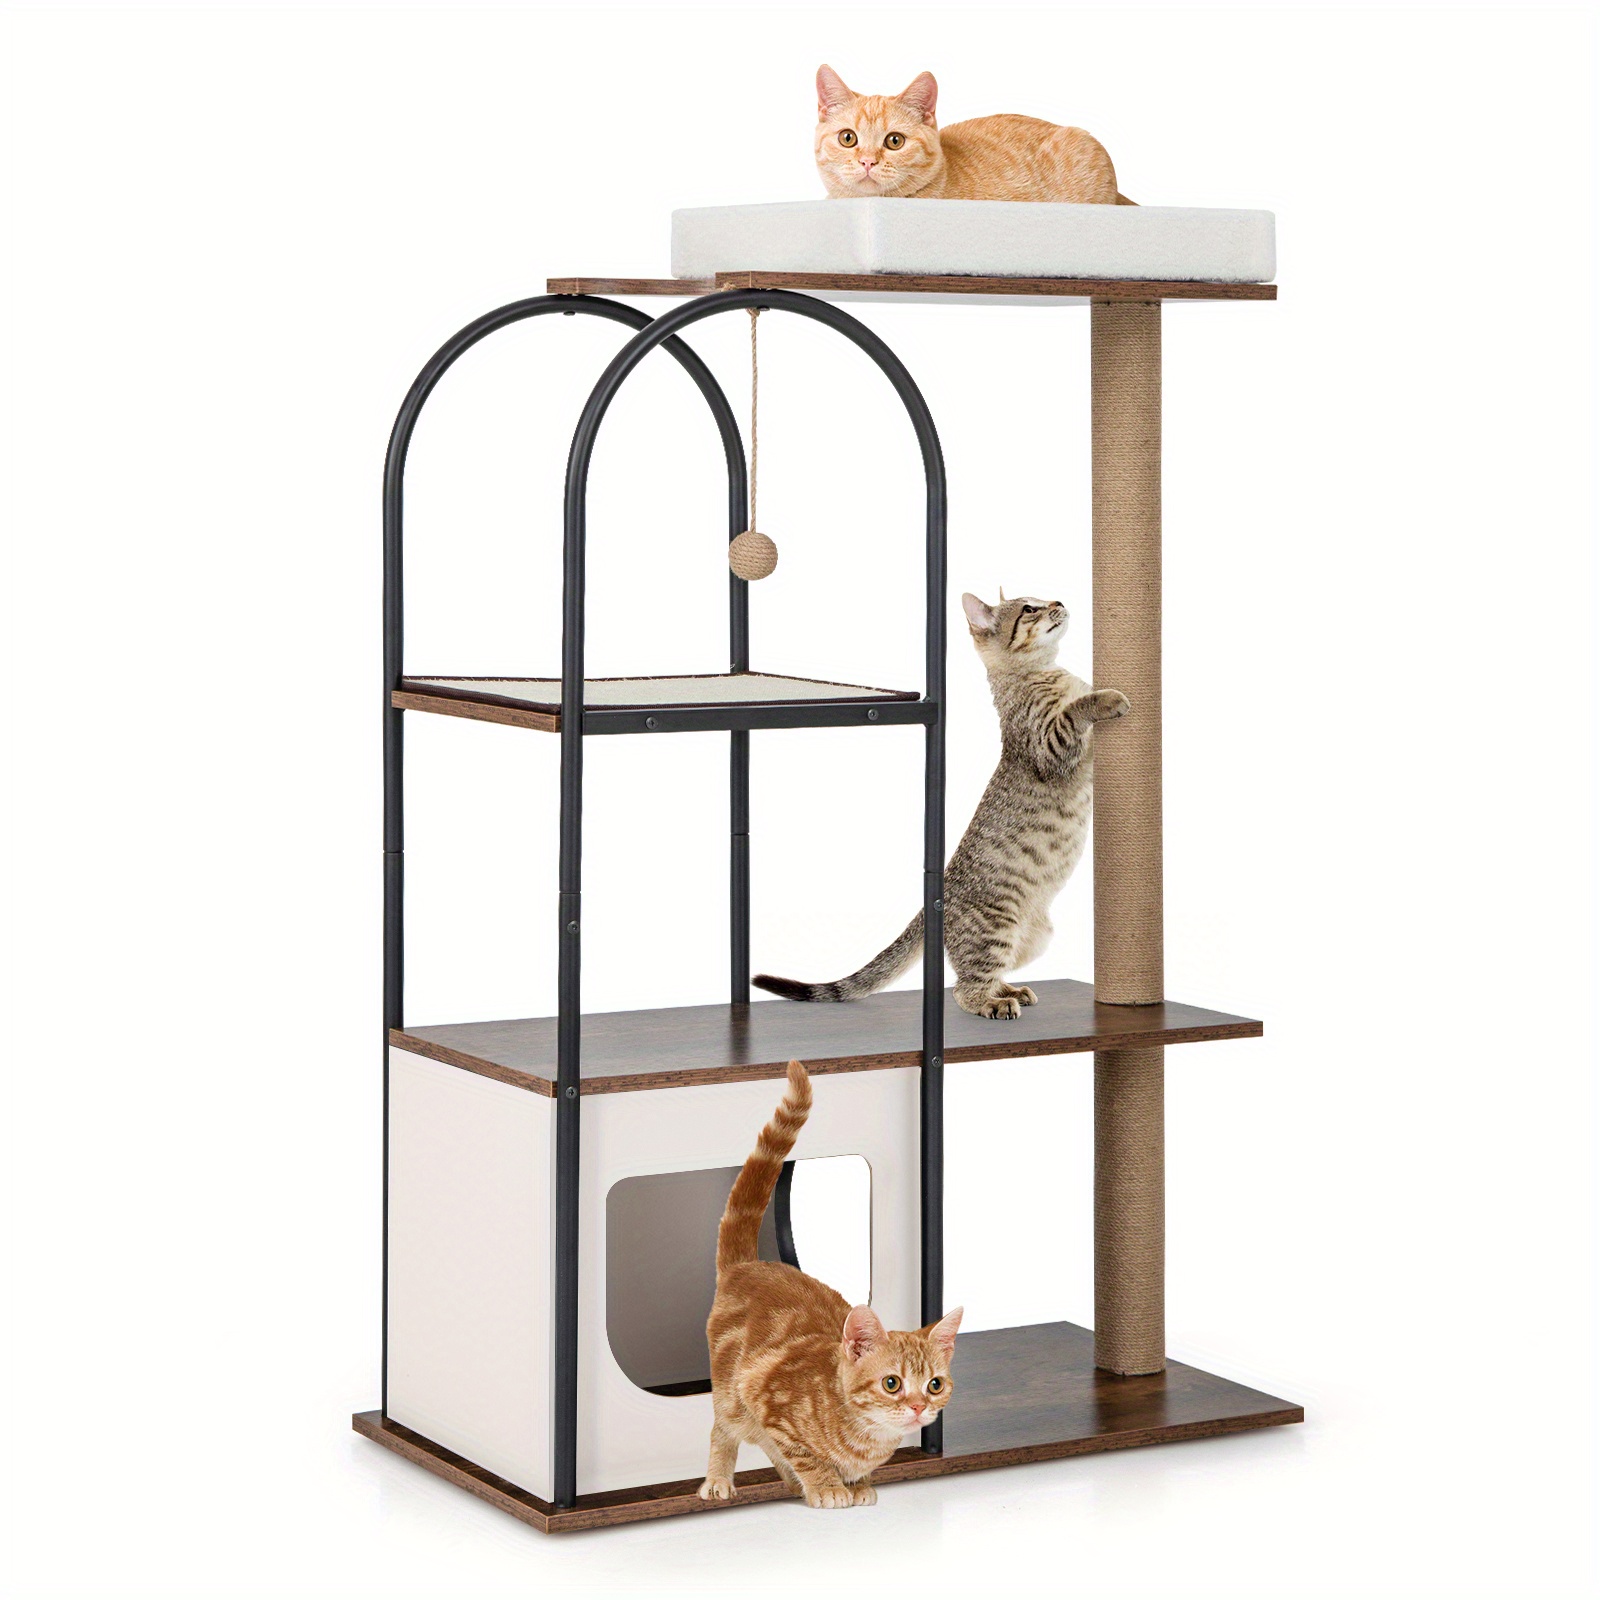 

Lifezeal 47'' Large Cat Tree Tower W/ Top Perch Cat Bed Cat Condo Scratching Posts Indoor